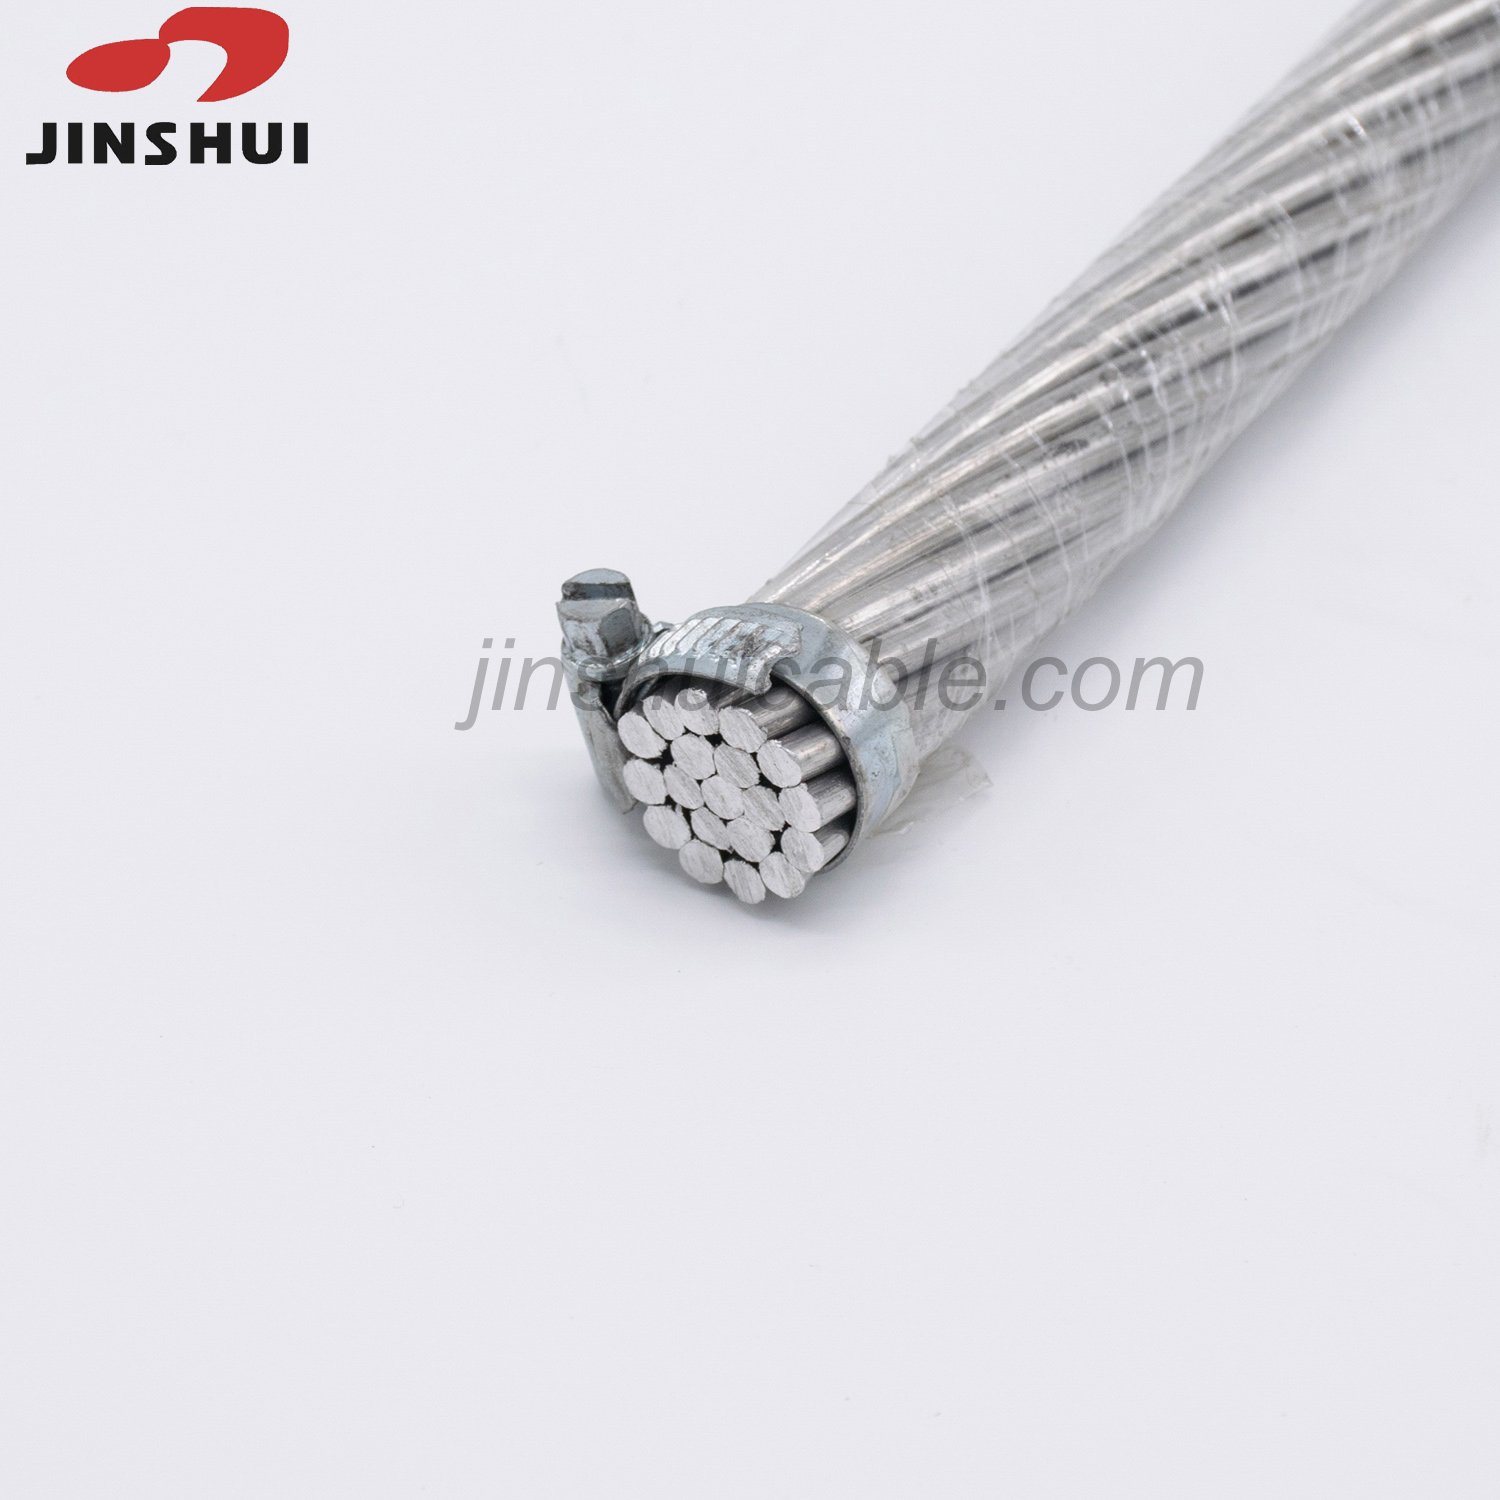 Bare Wire Cable for Overhead Transmission